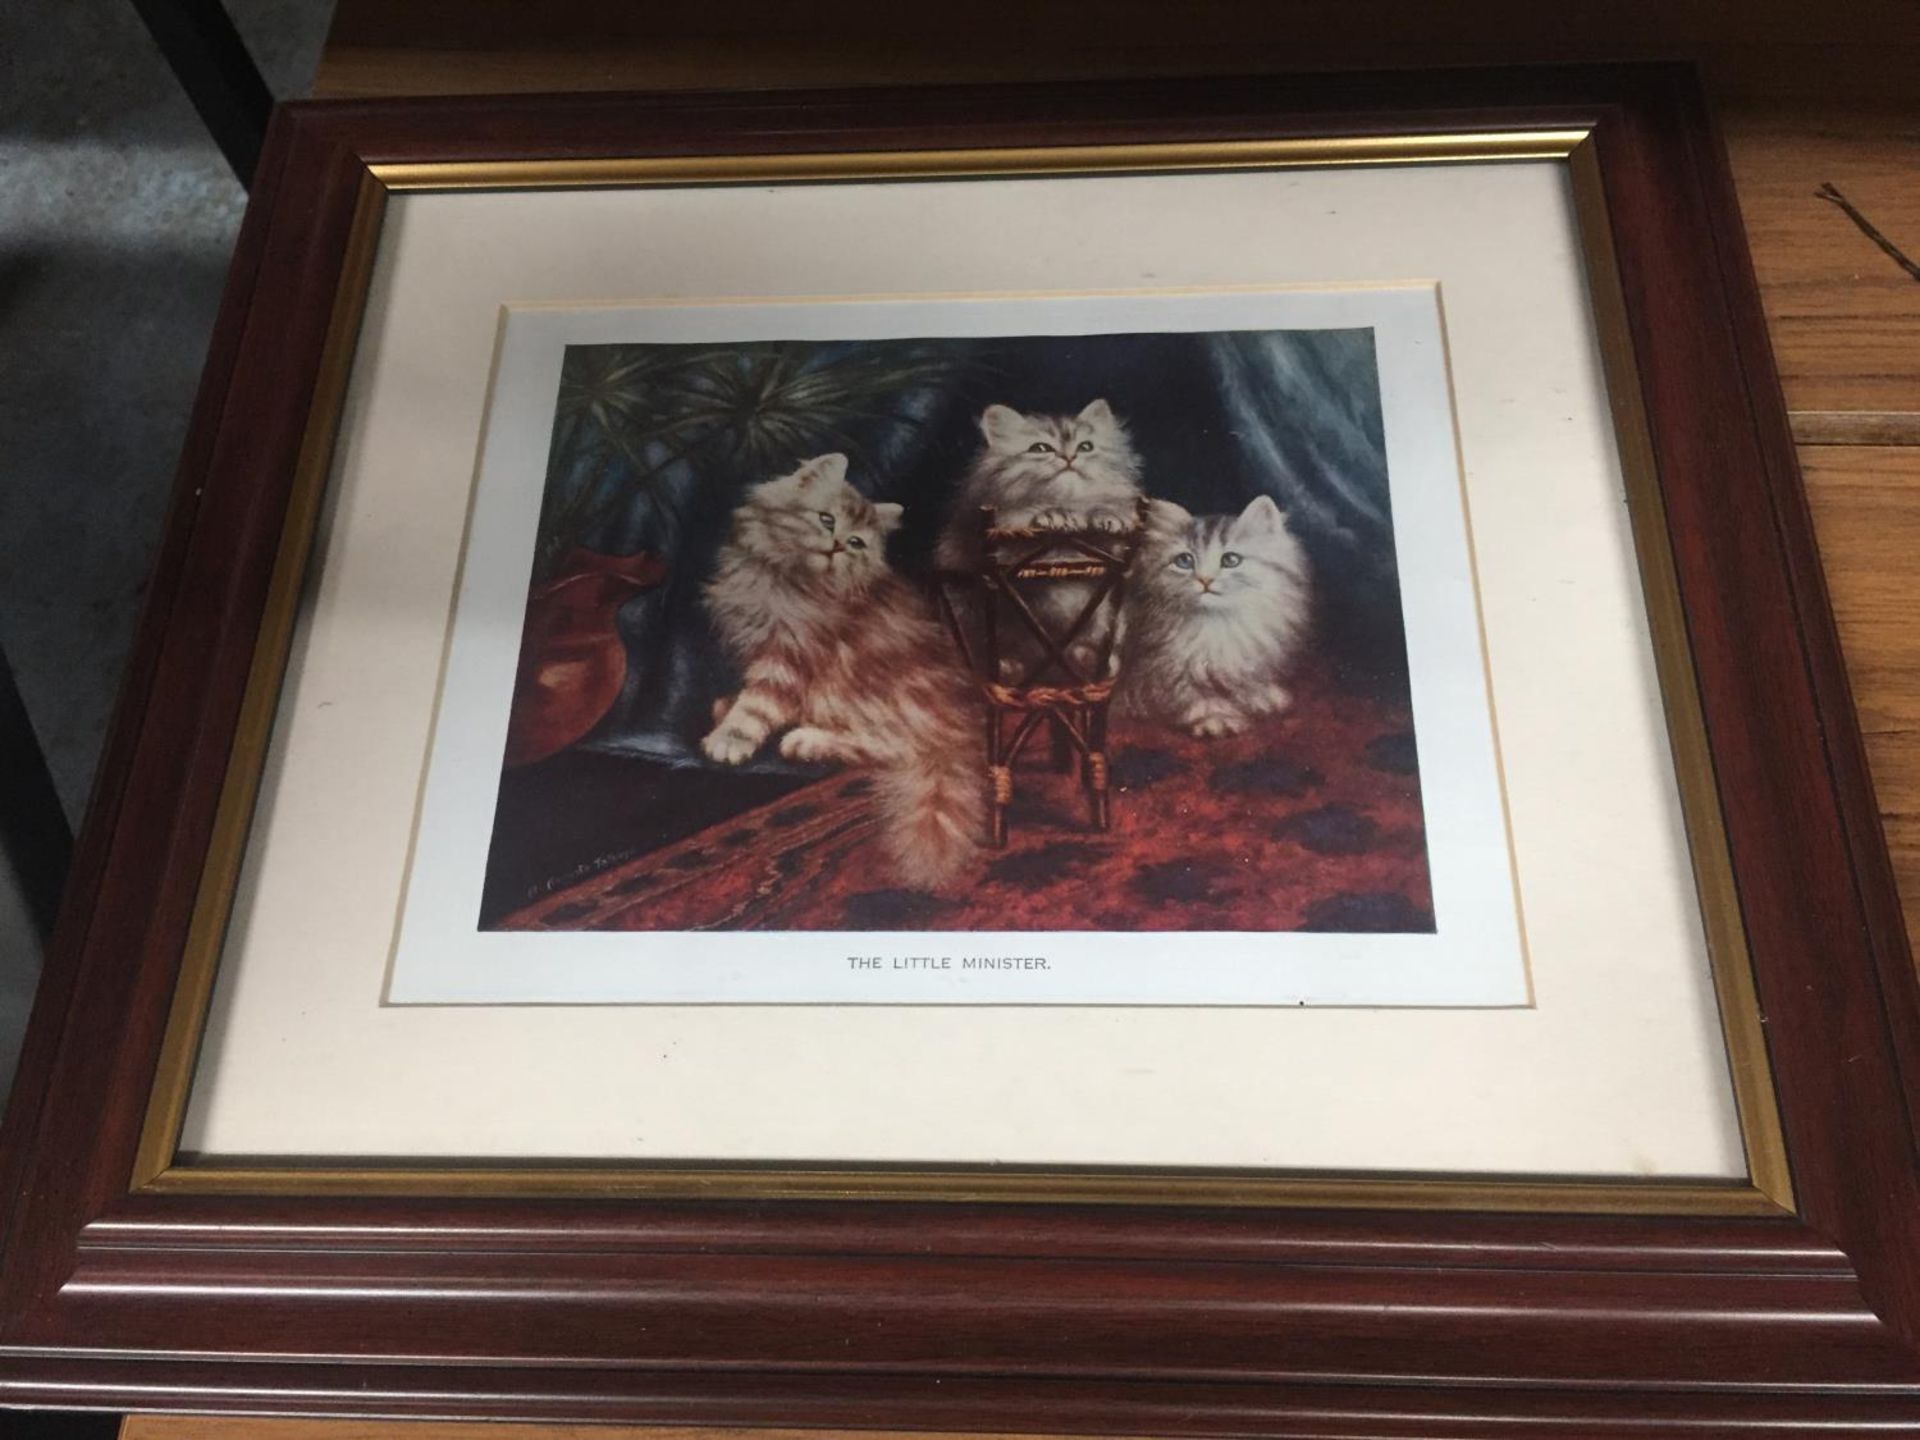 TWO FRAMED CERAMIC TILES FEATURING VINTAGE PUB SCENES PLUS A FRAMED PRINT OF THREE KITTENS - Image 3 of 3